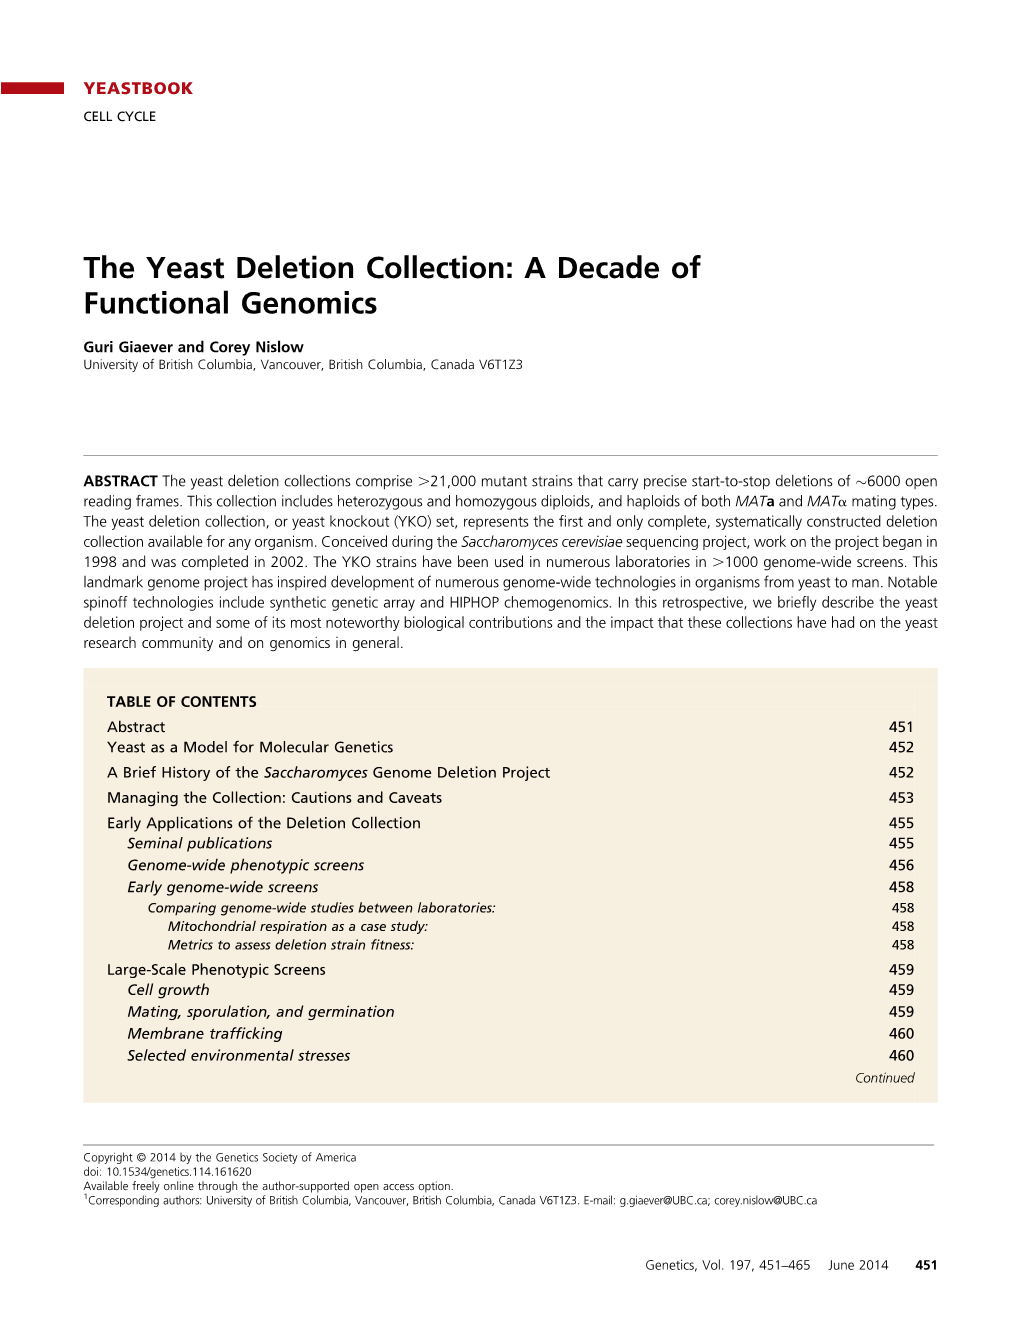 The Yeast Deletion Collection: a Decade of Functional Genomics